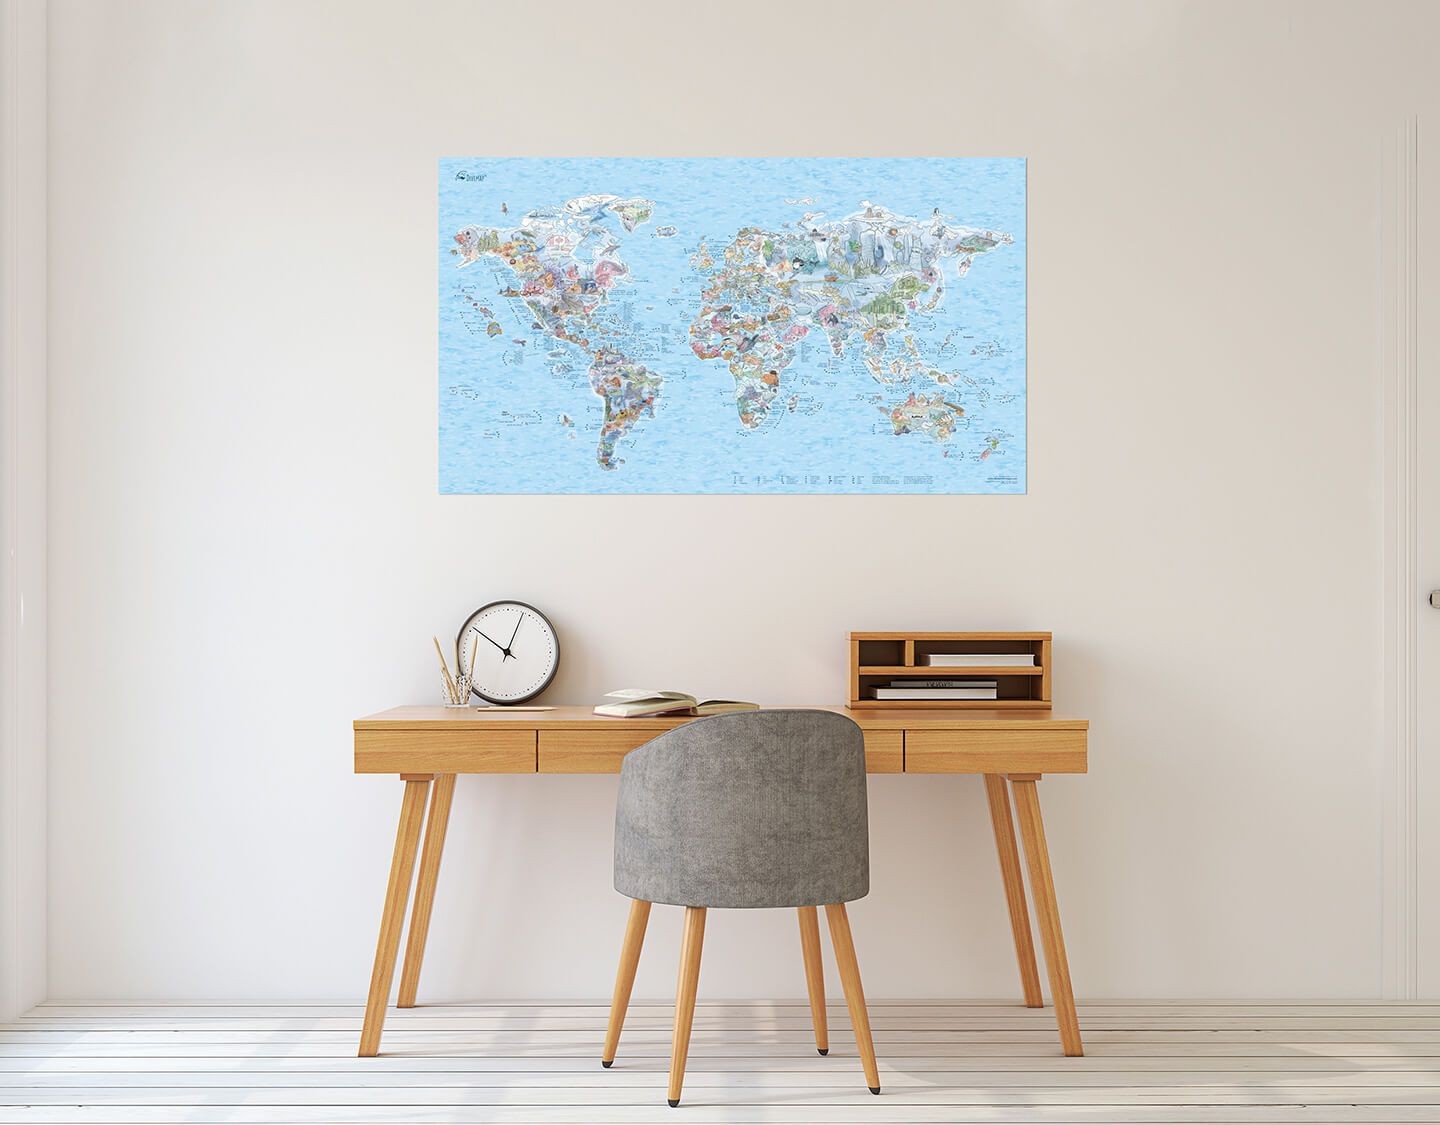 Awesome Maps - World Map Poster - Dive Map Re-writable